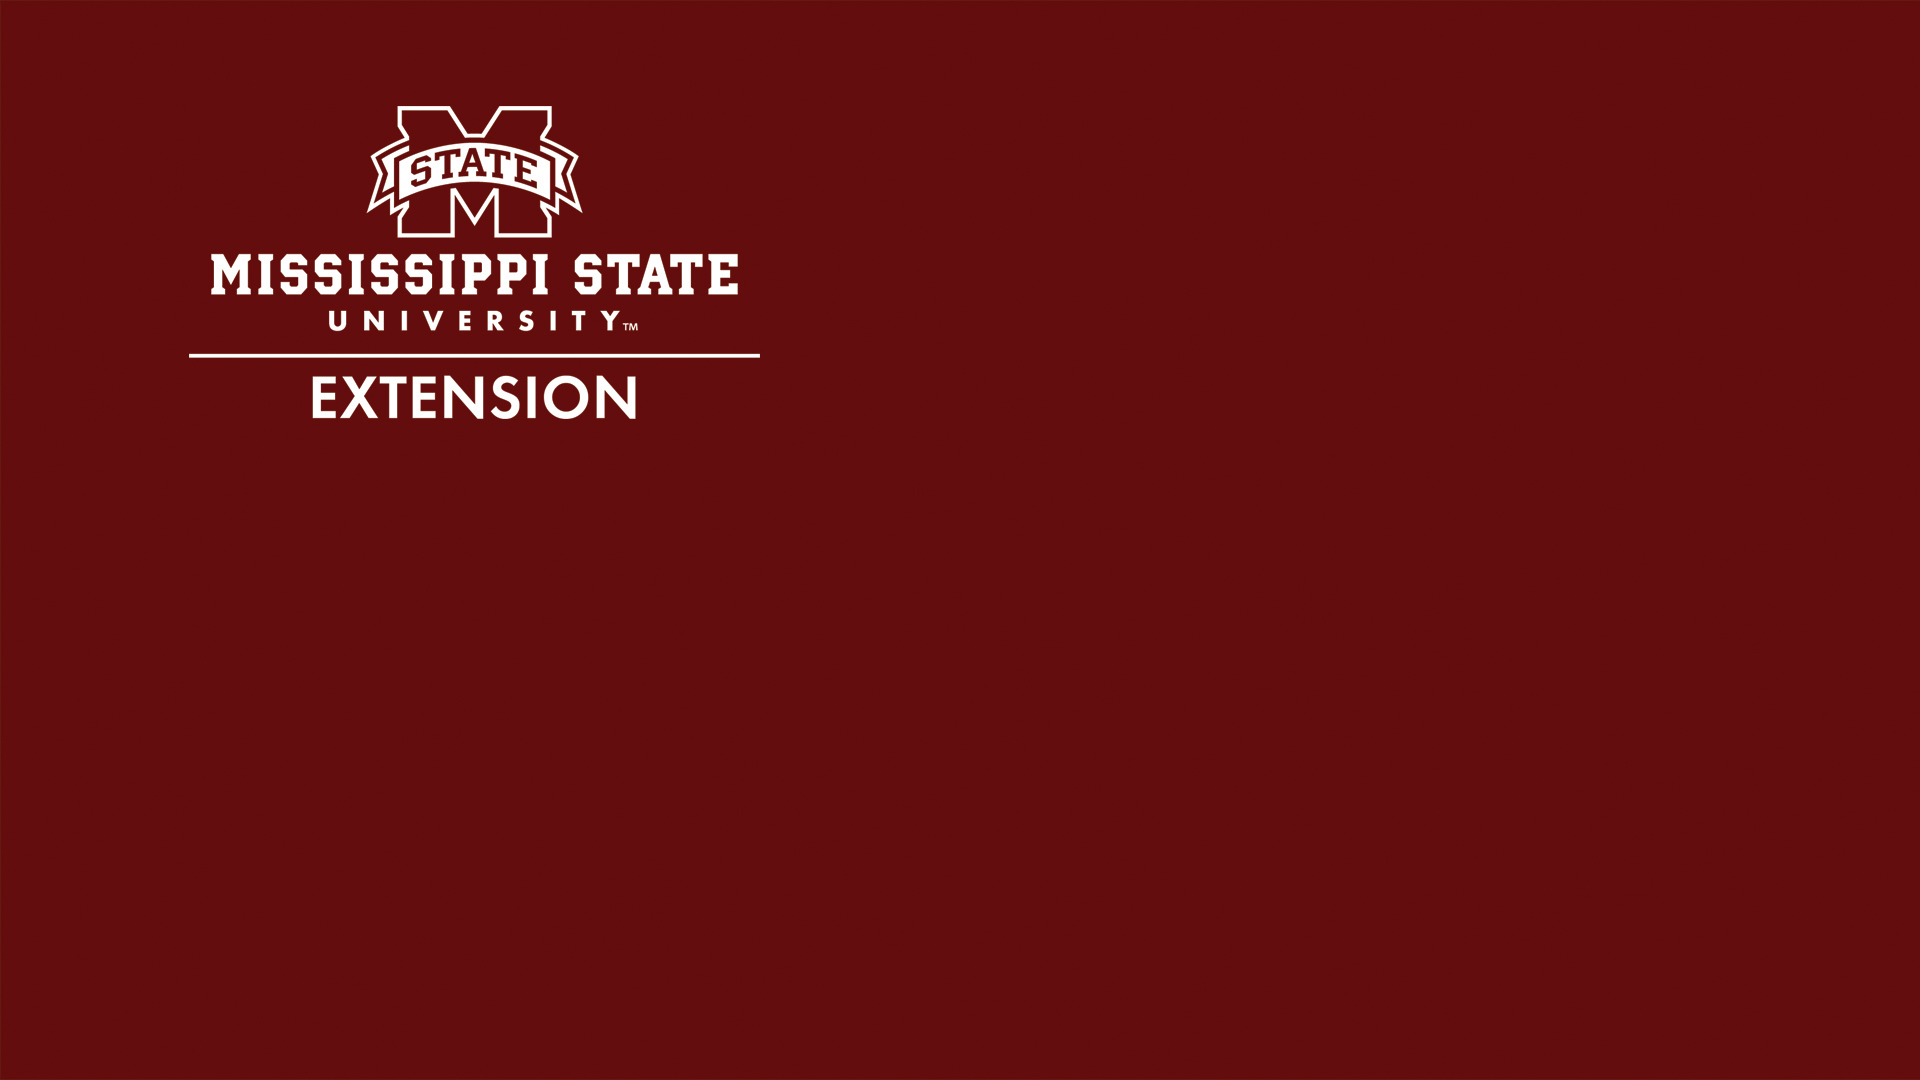 Maroon background with Extension logo in top left.